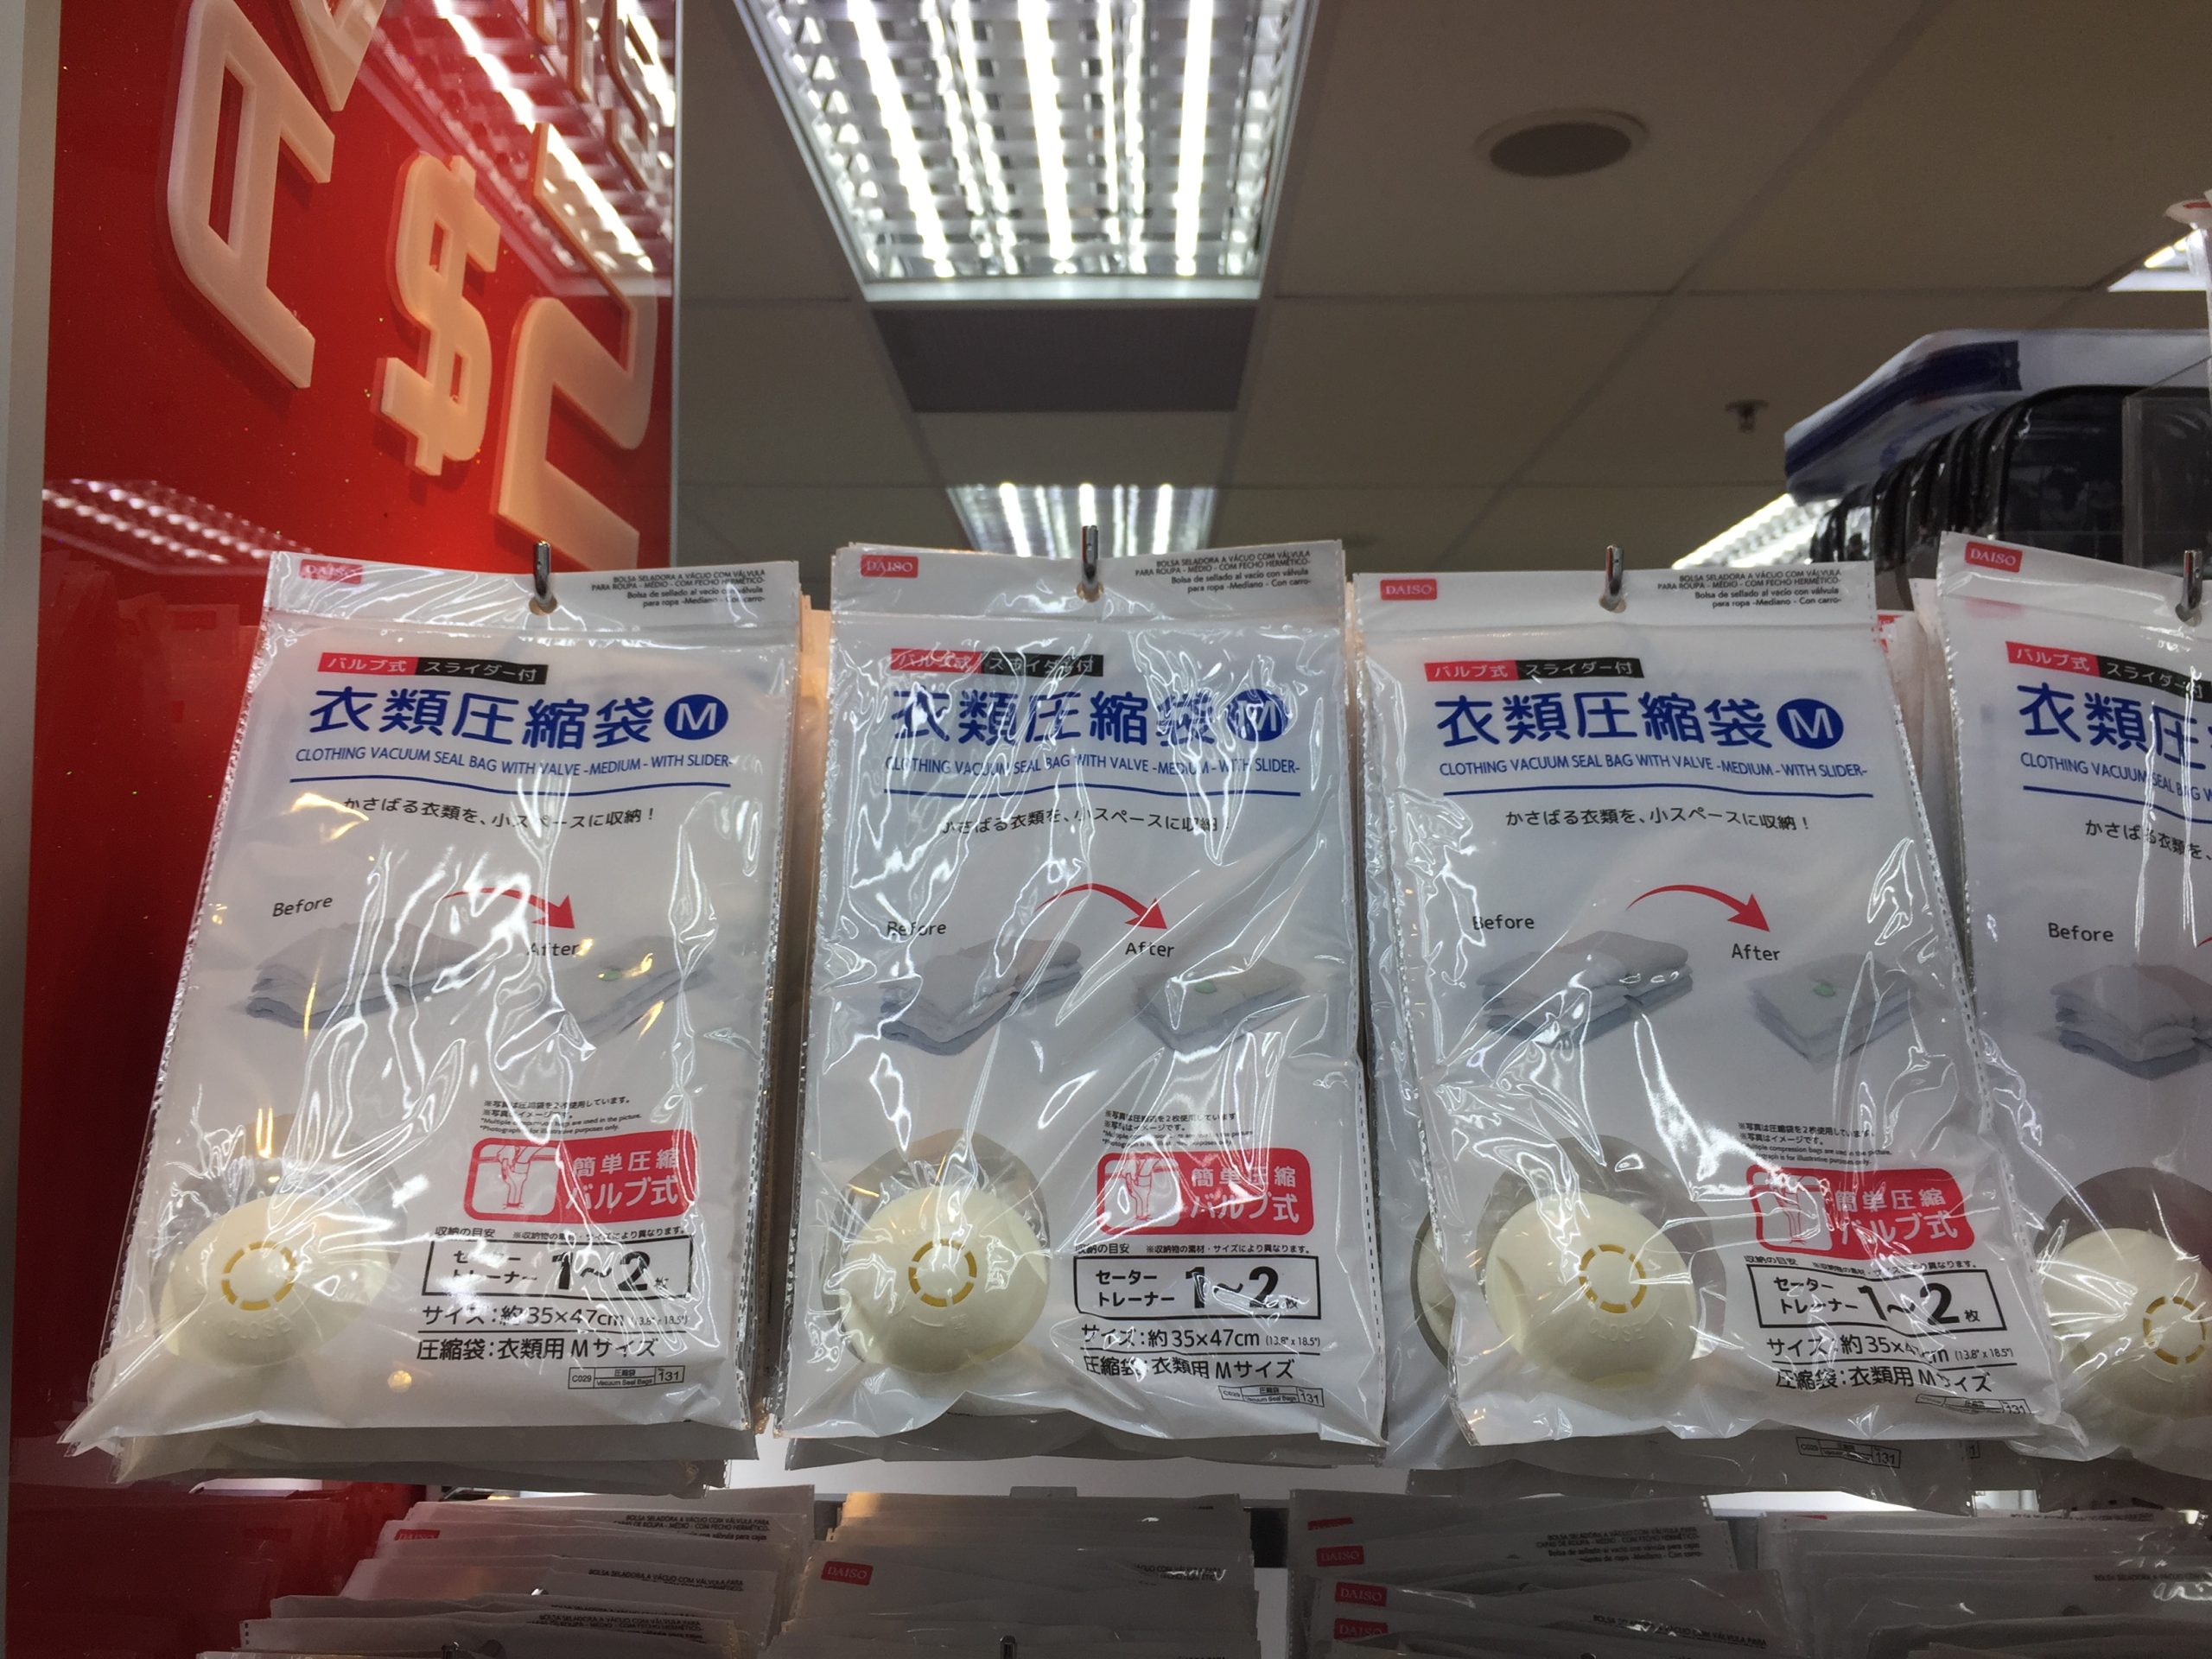 Vacuum seal bag from Daiso